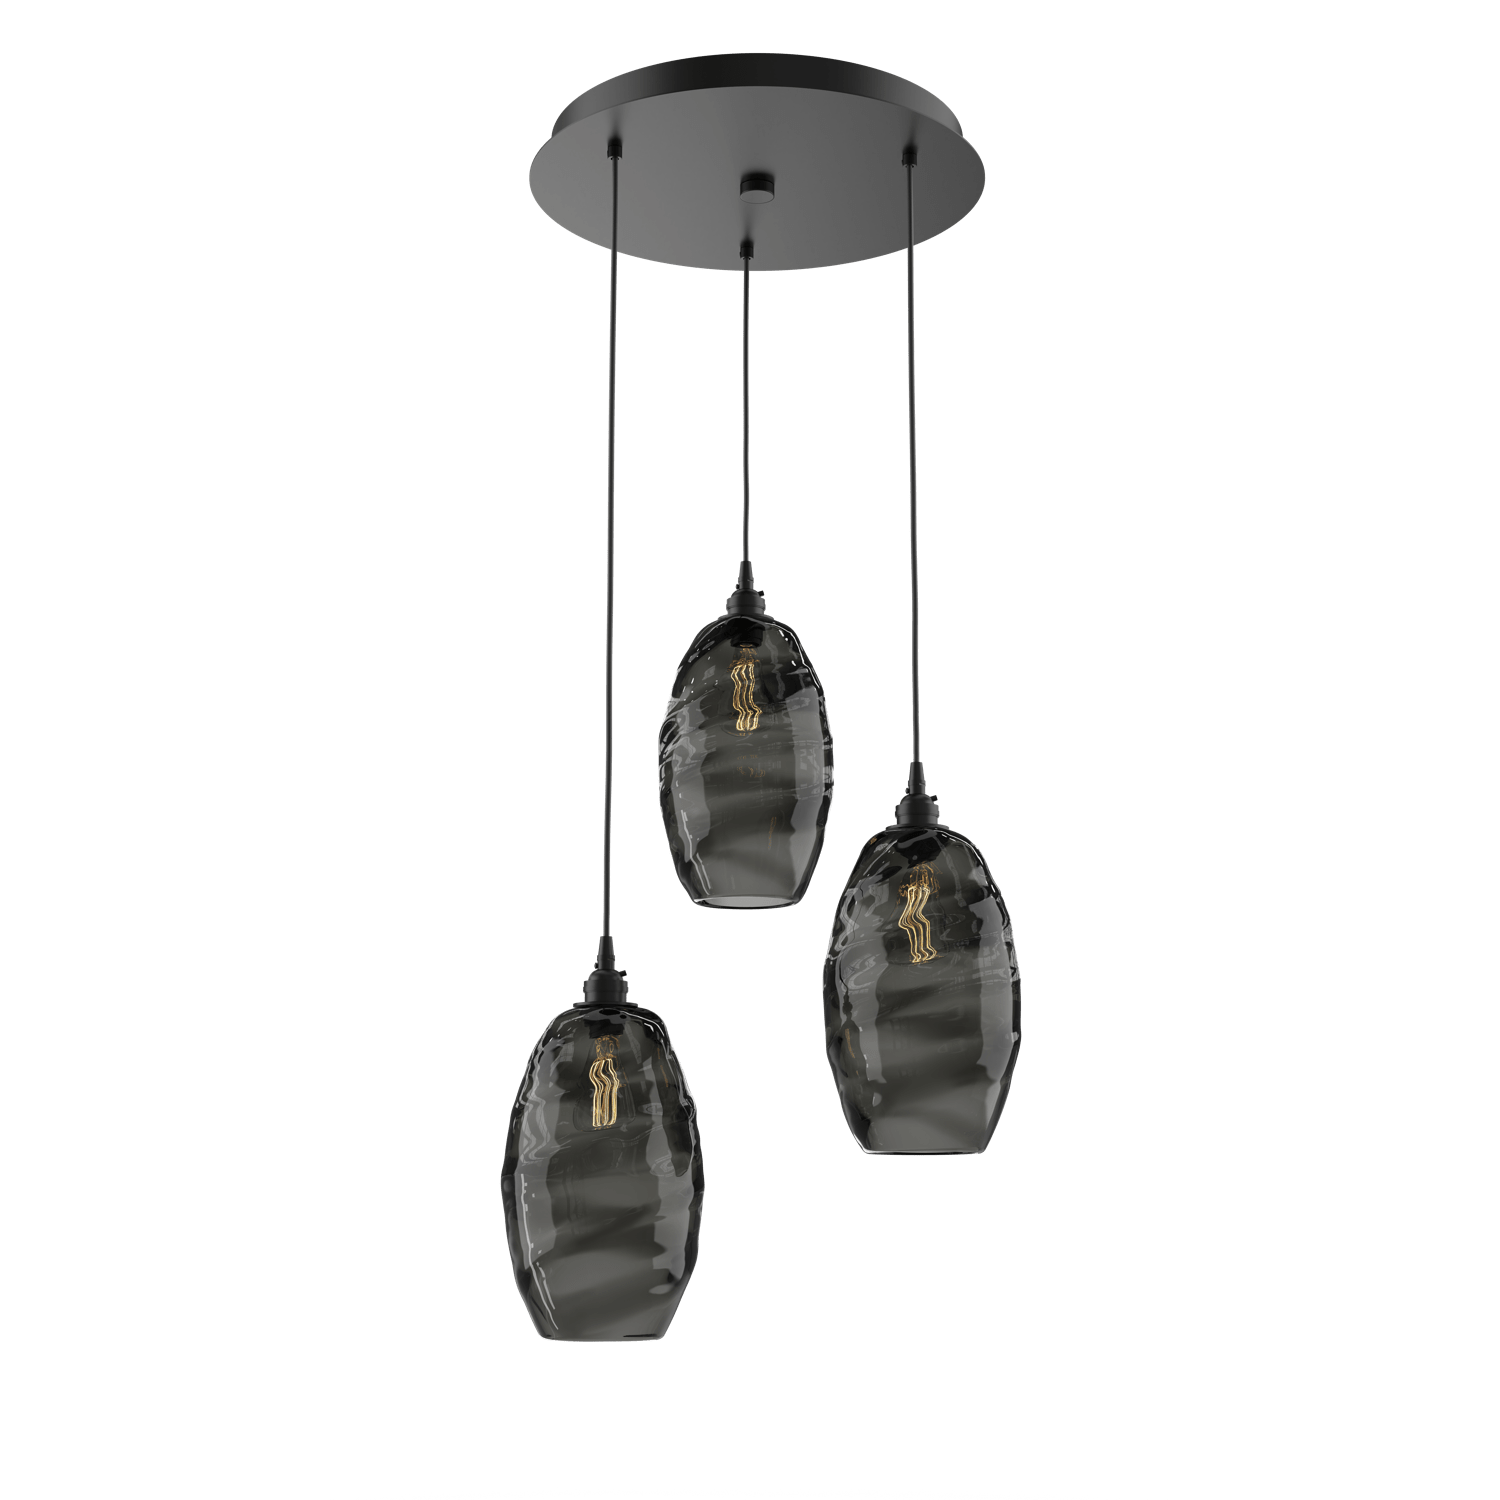 CHB0035-03-MB-OS-Hammerton-Studio-Optic-Blown-Glass-Elisse-3-light-round-pendant-chandelier-with-matte-black-finish-and-optic-smoke-blown-glass-shades-and-incandescent-lamping